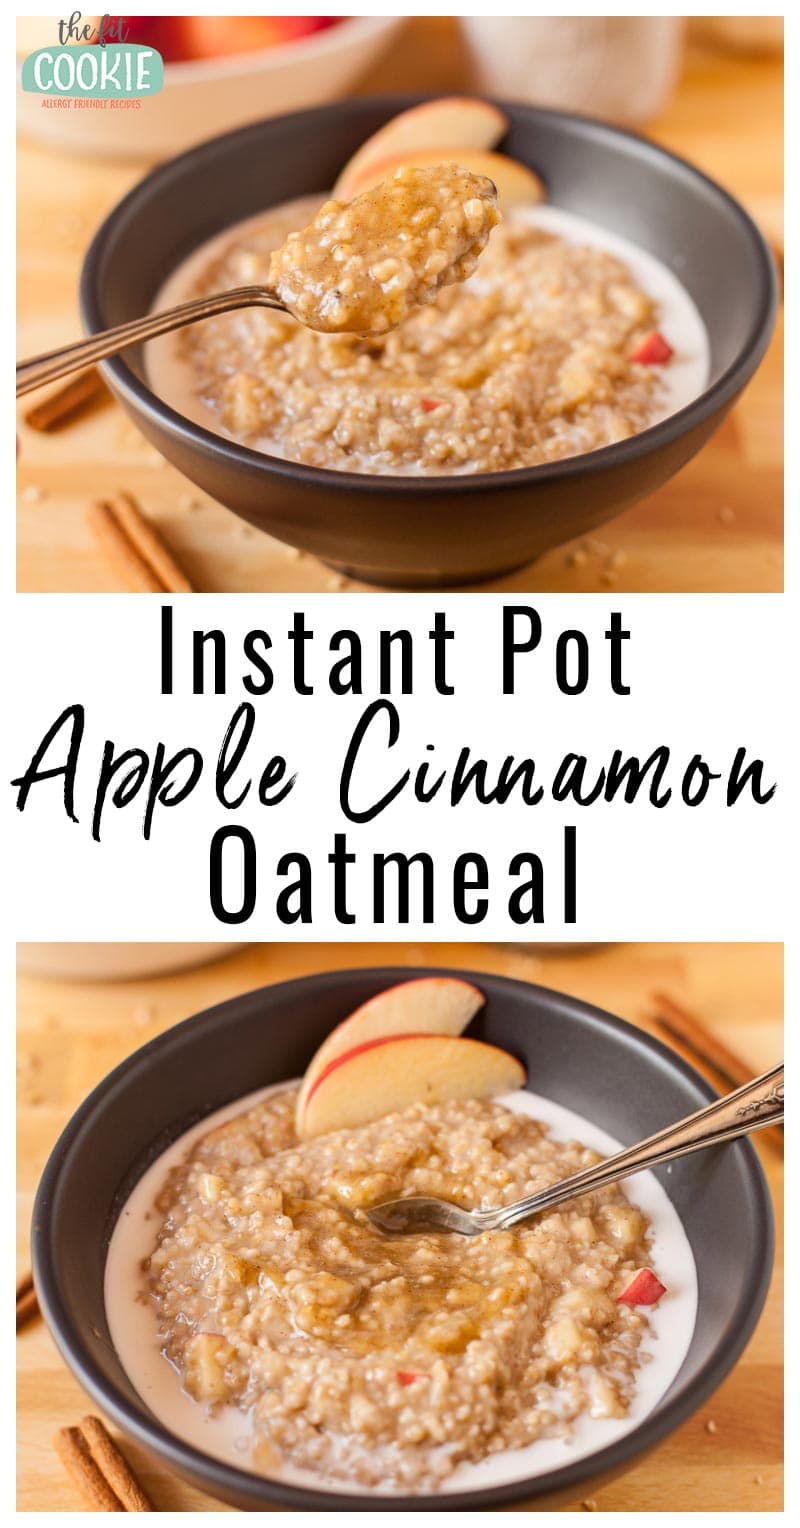 photo collage of instant pot apple cinnamon oatmeal in a black bowl